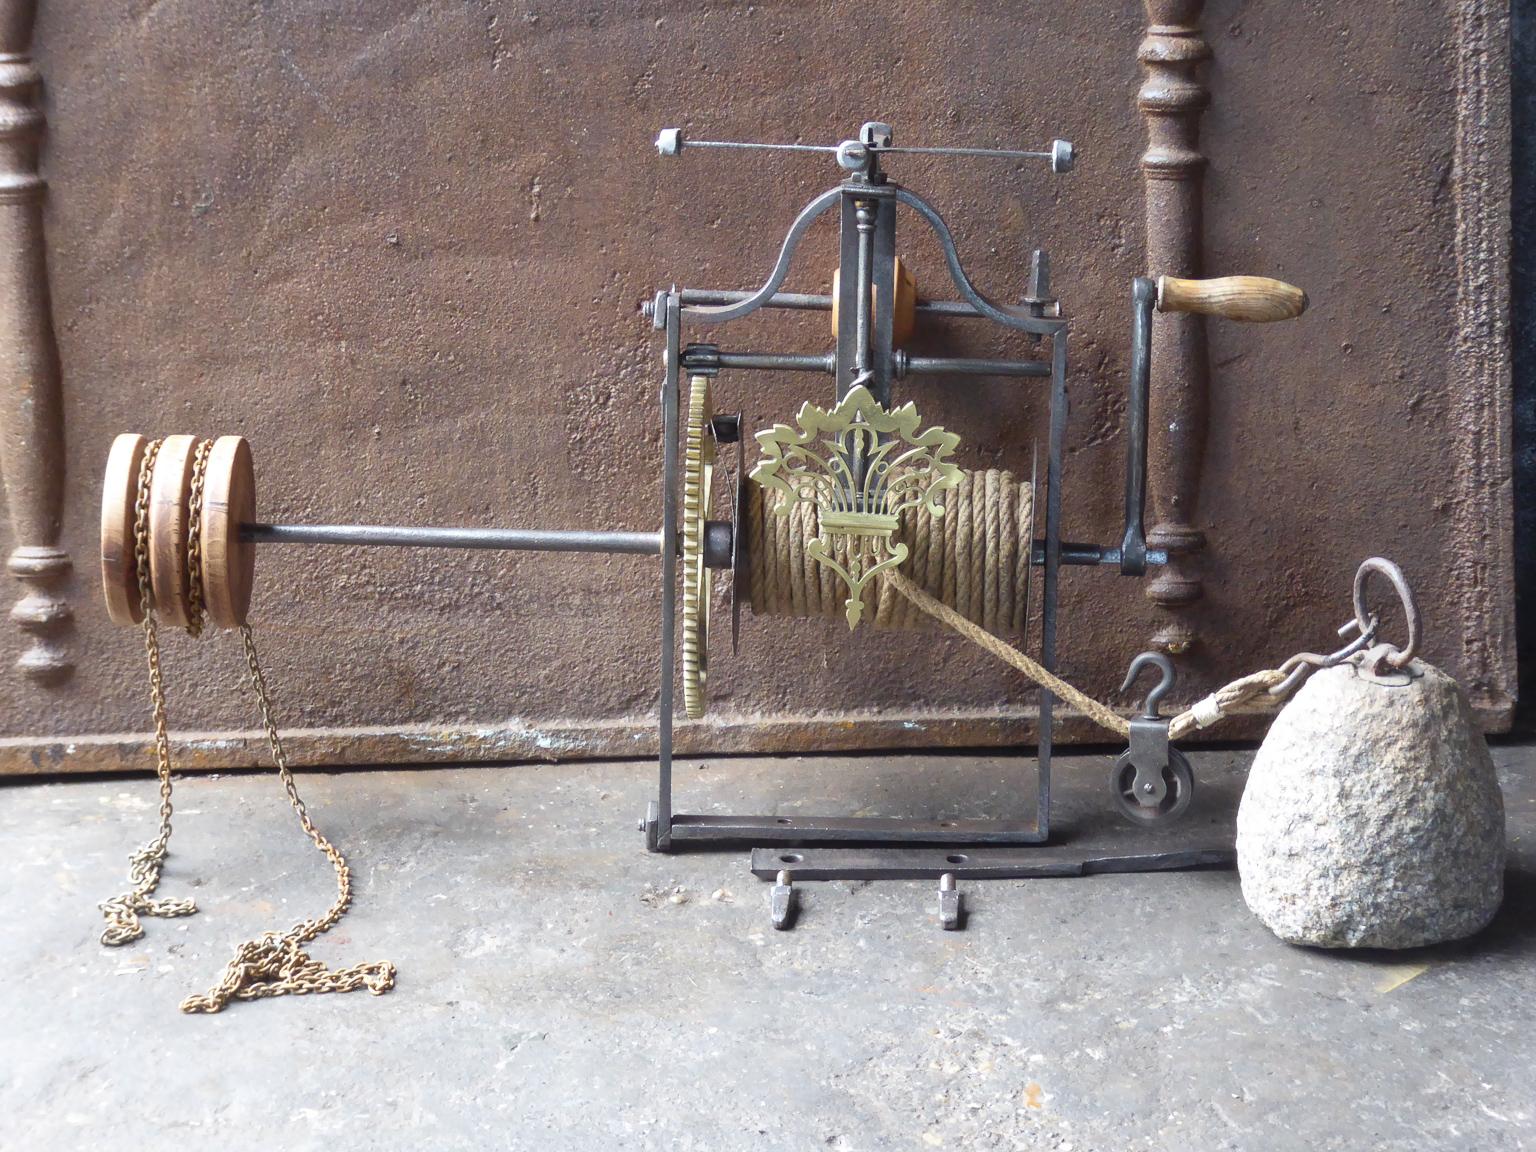 18th century French roasting jack made of wrought iron, wood and brass. The roasting jack can be used for cooking in the fireplace. It is fully functional. 







 